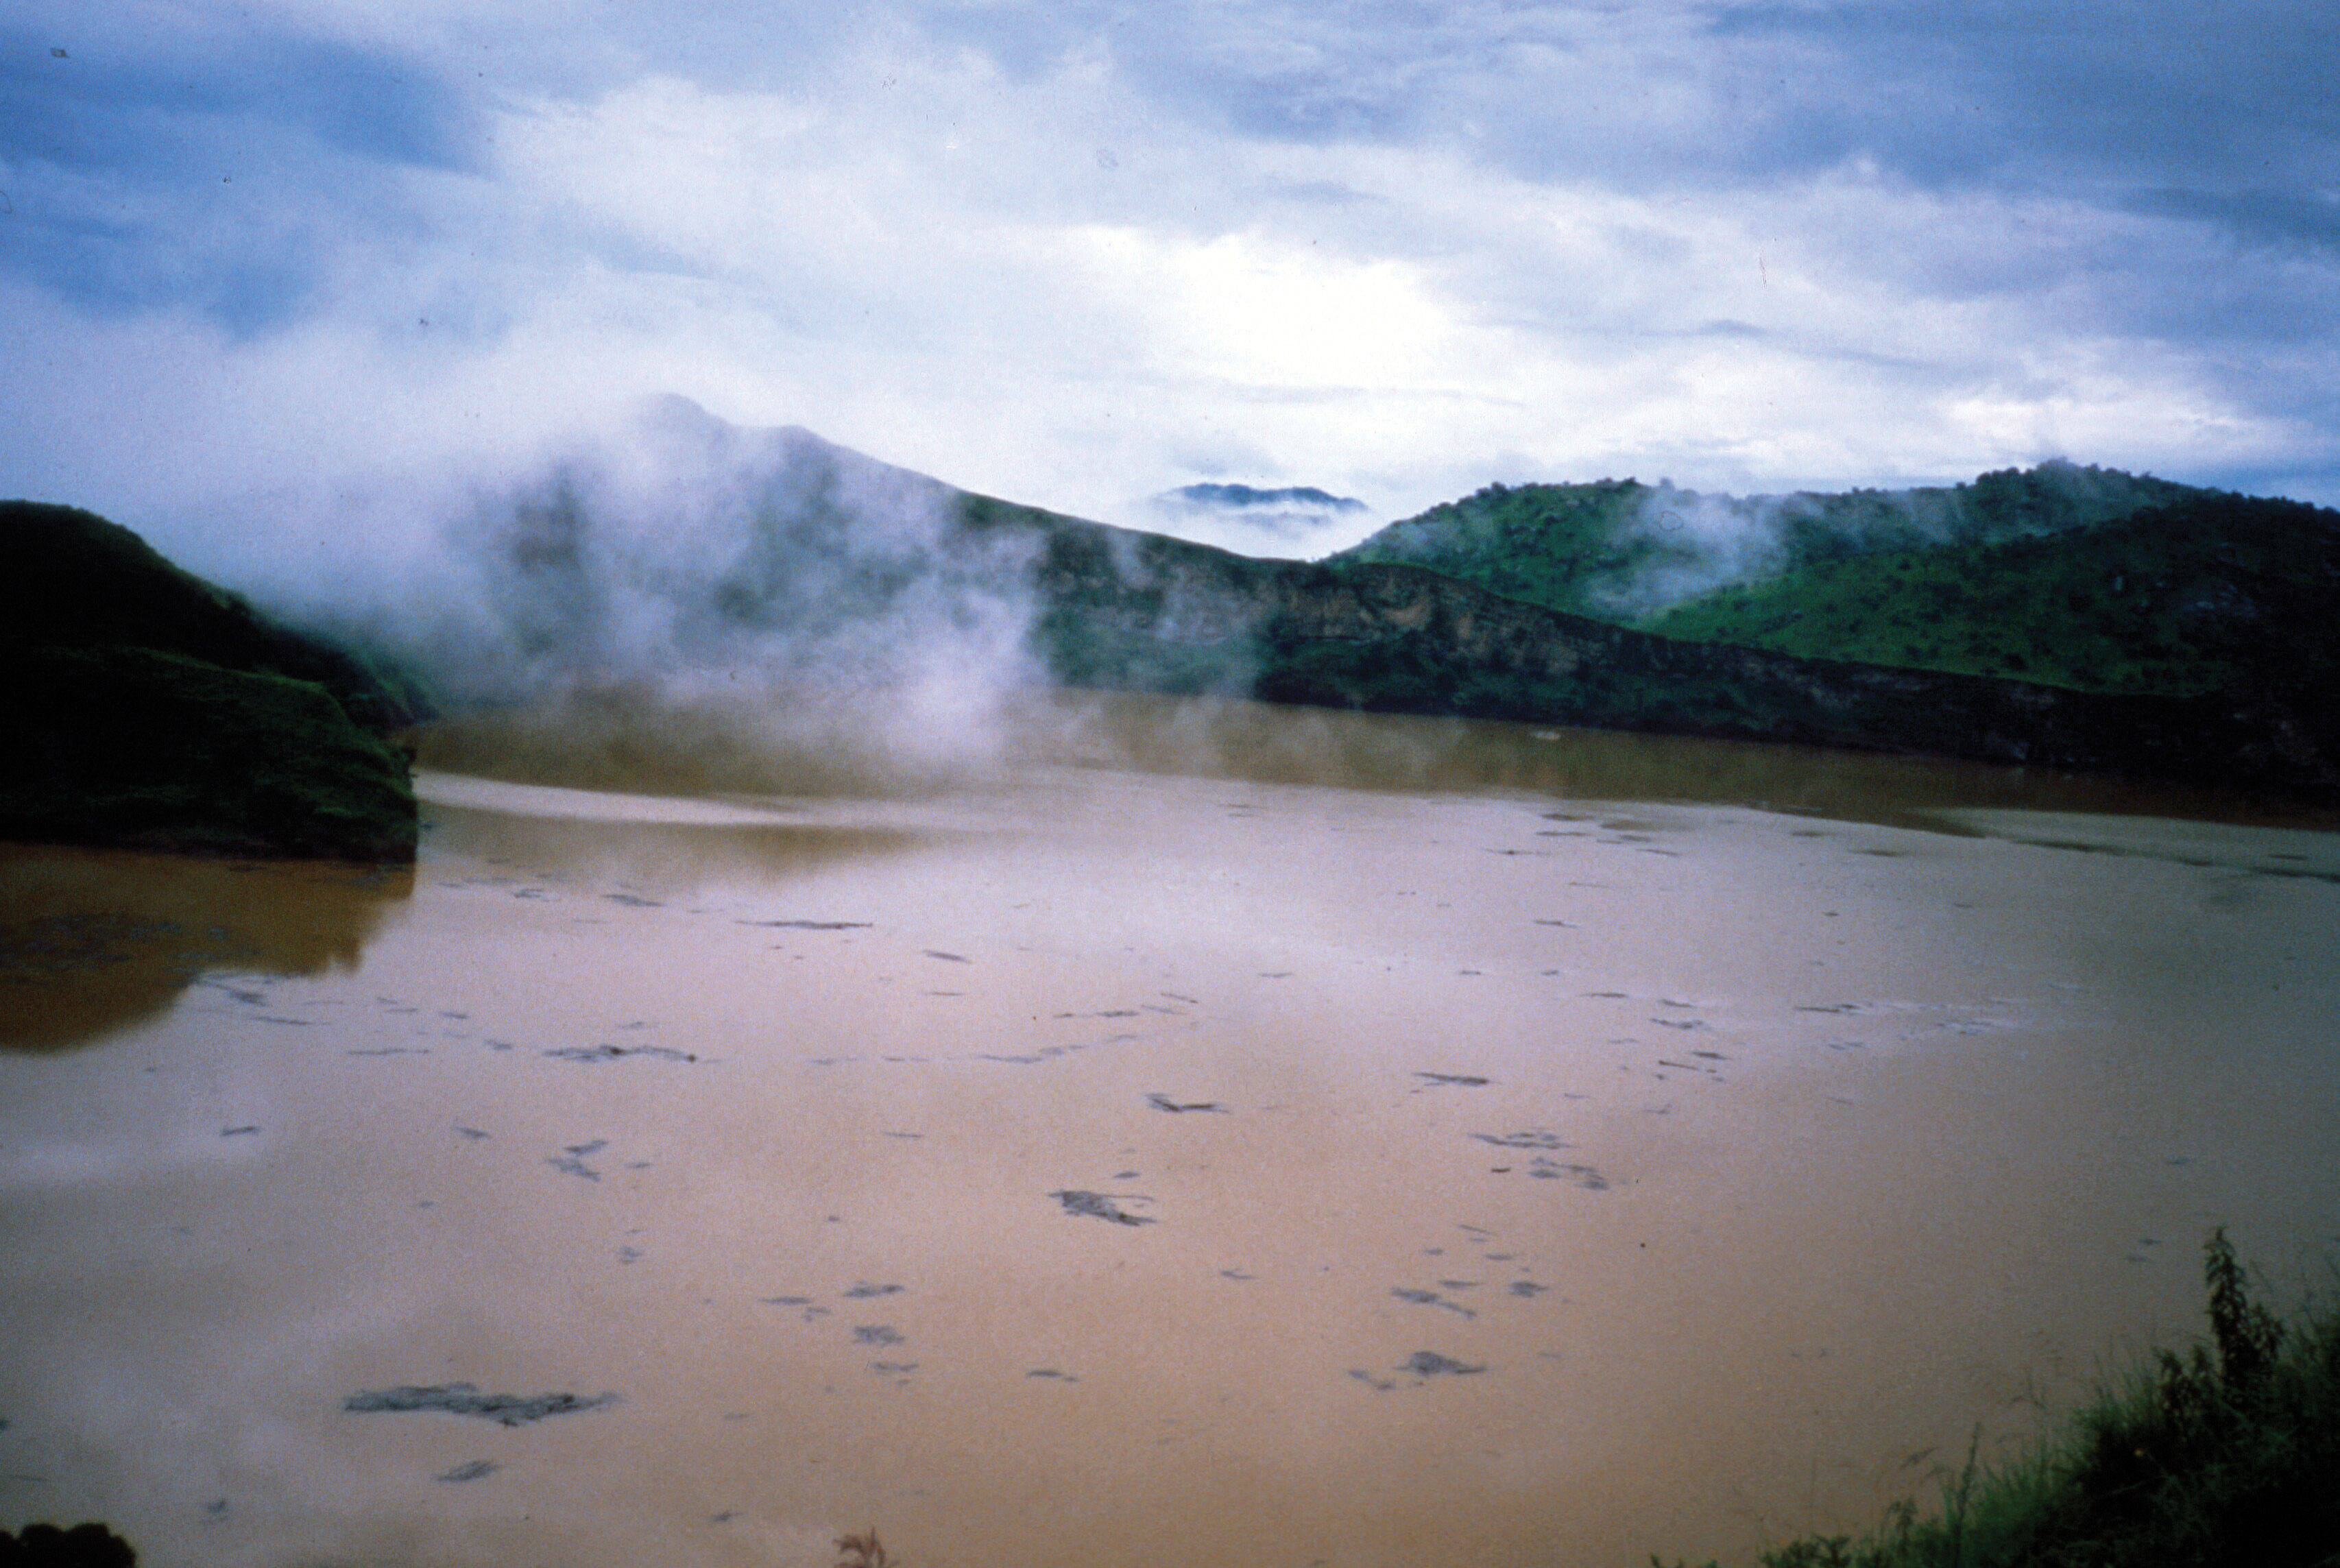 'Carbon dioxide gas erupts from volcanic Lake Nyos in Cameroon, killing up to 1,800 people within a 20-kilometer range.